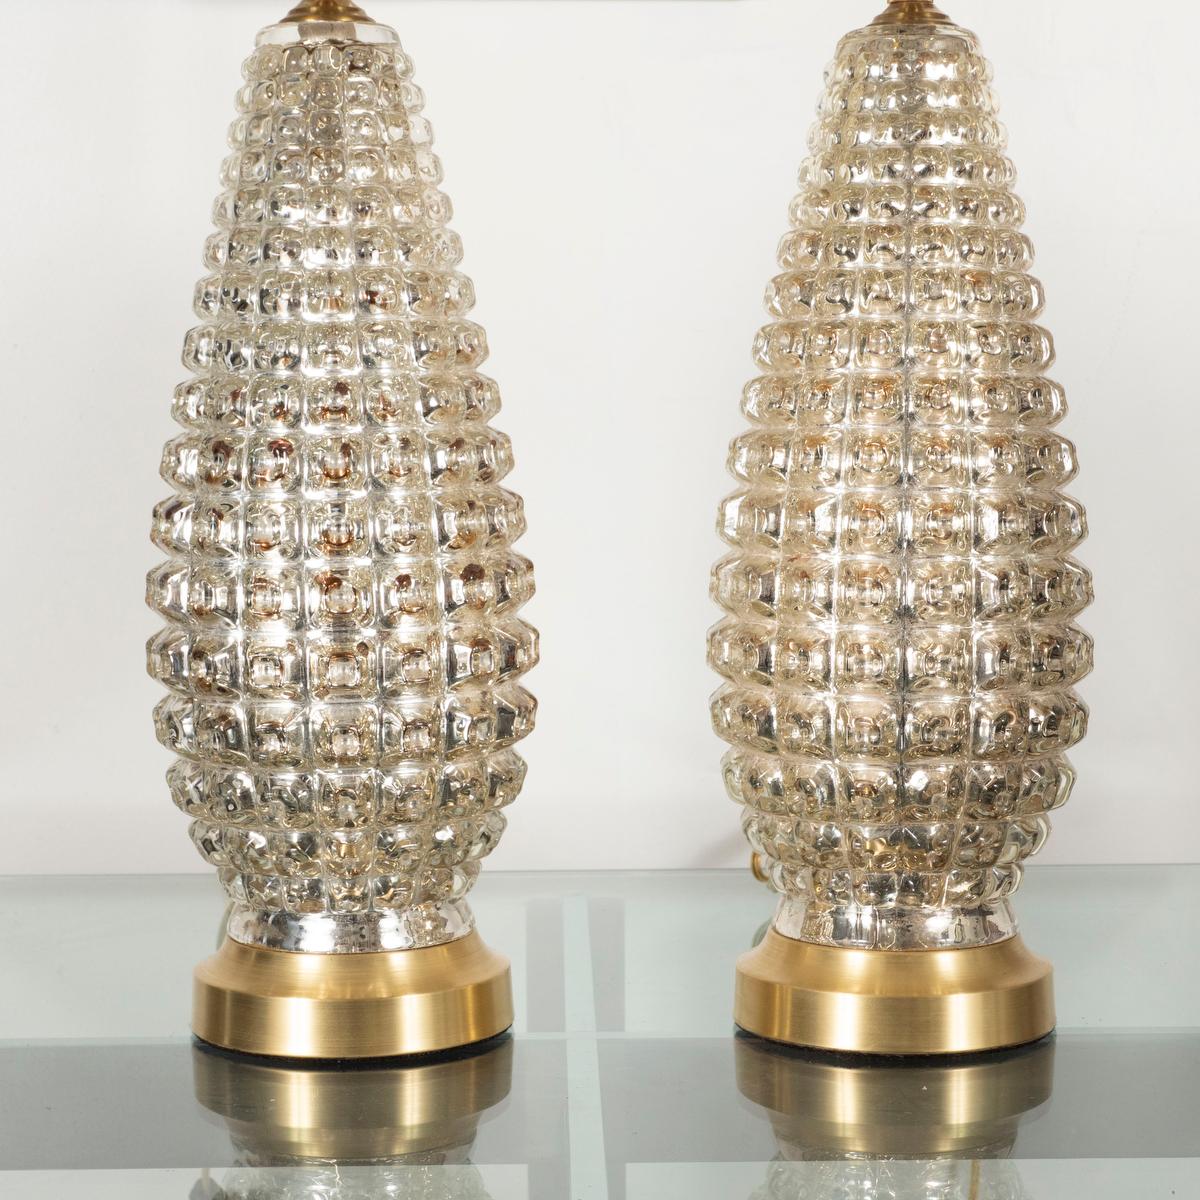 Pair of teardrop mercury glass lamps with faceted pattern.